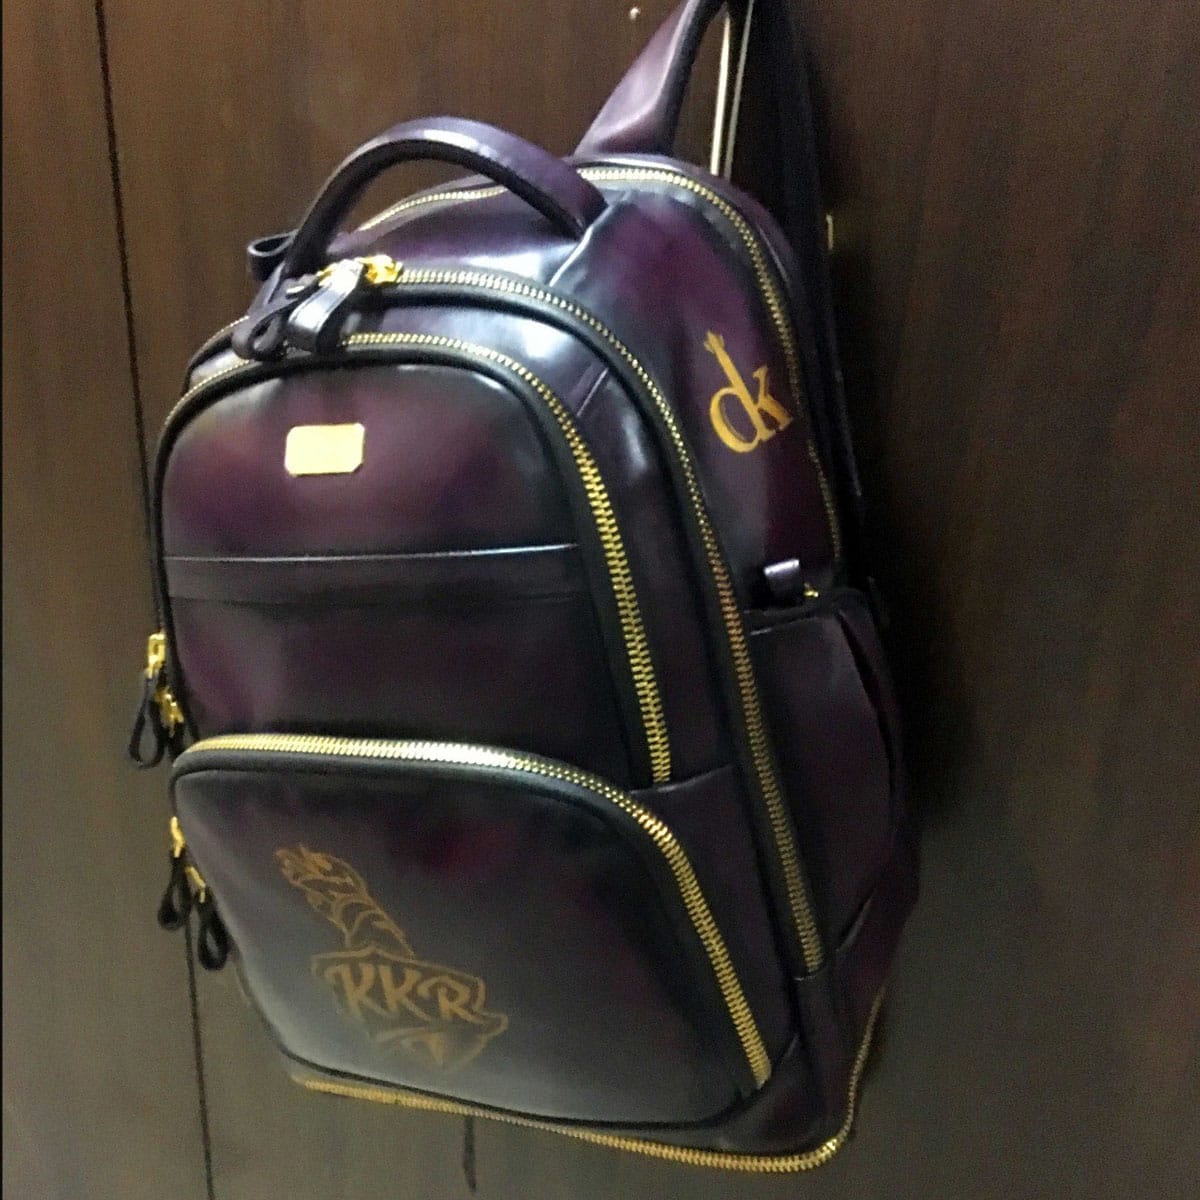 Buy EUME IPL 2023 KKR Kolkata Knight Riders 33 Ltrs Duffle Bag, Polyester,  Light Weight Bags Come with Enough Space with Shoe Compartment for Men and  Women Gym Travel and Sport, Black